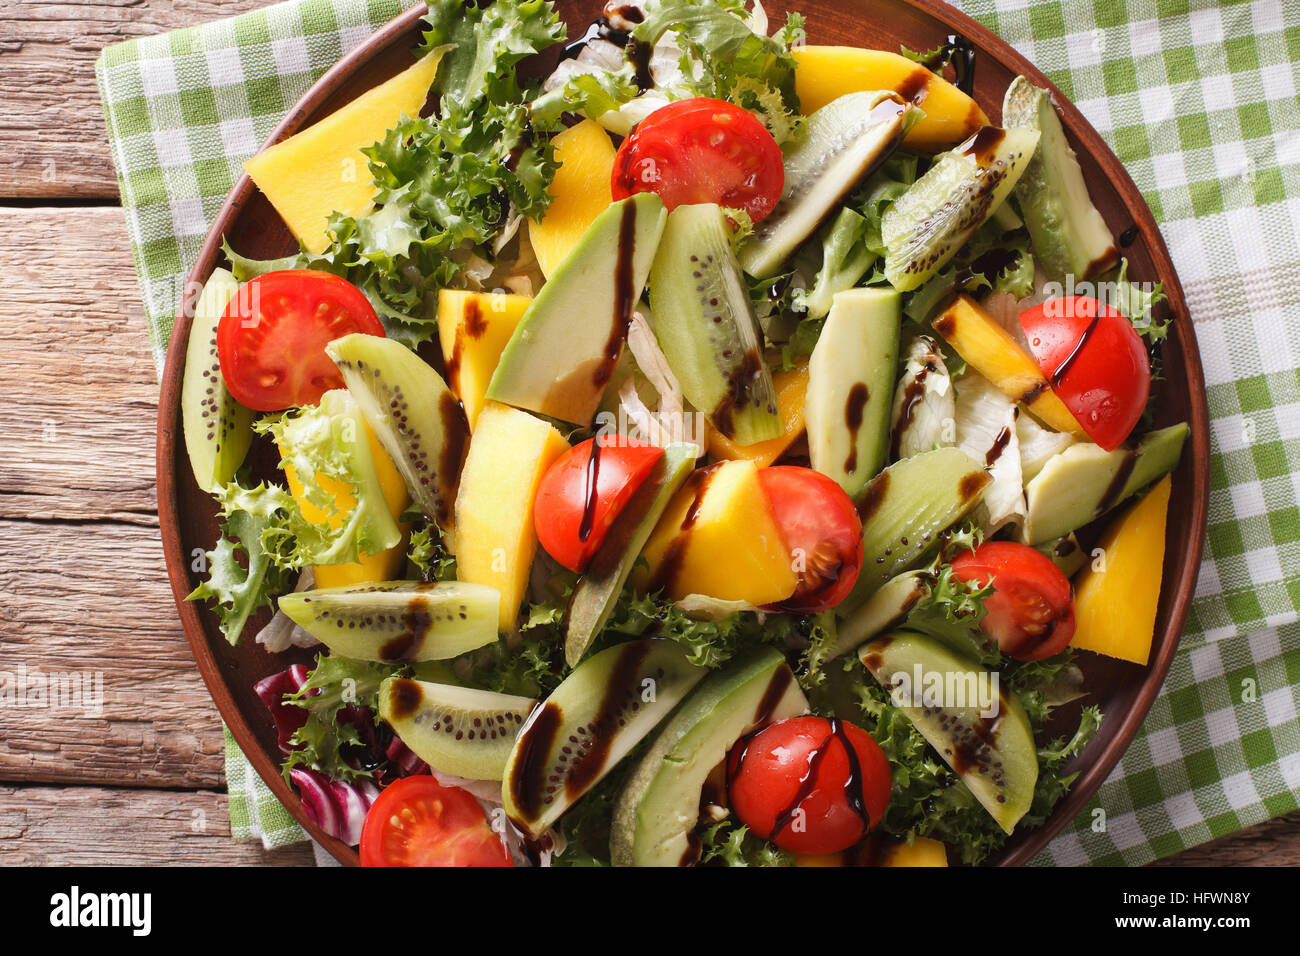 Fruit vegetable salad of mango, avocado, kiwi, tomato and lettuce on a plate close-up. Horizontal view from above Stock Photo